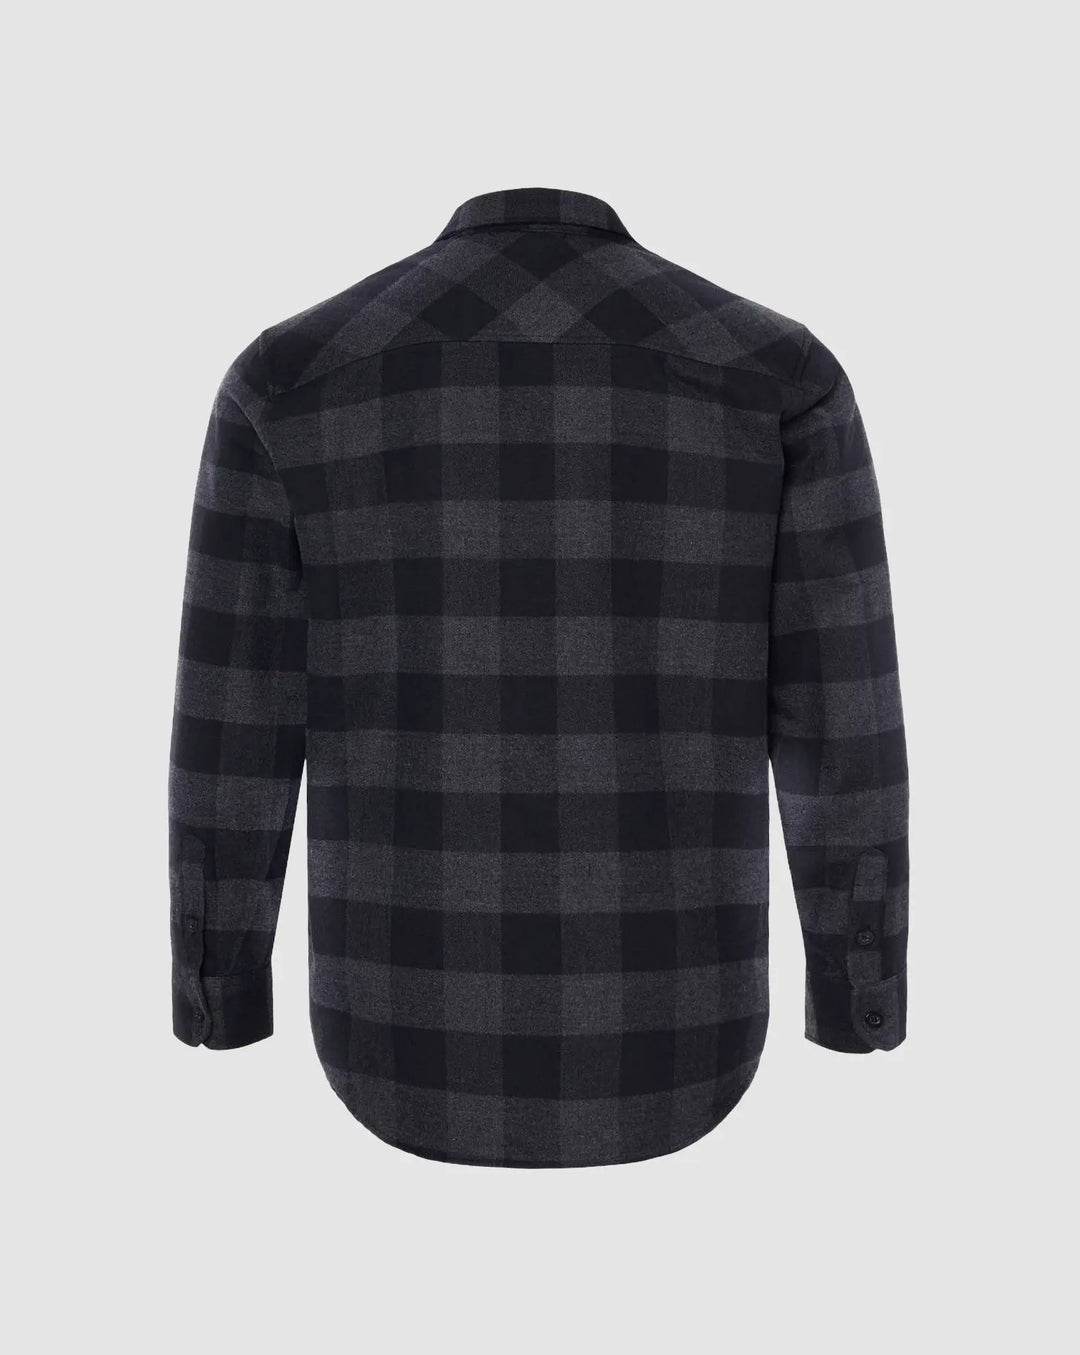 FAFO Charcoal Flannel